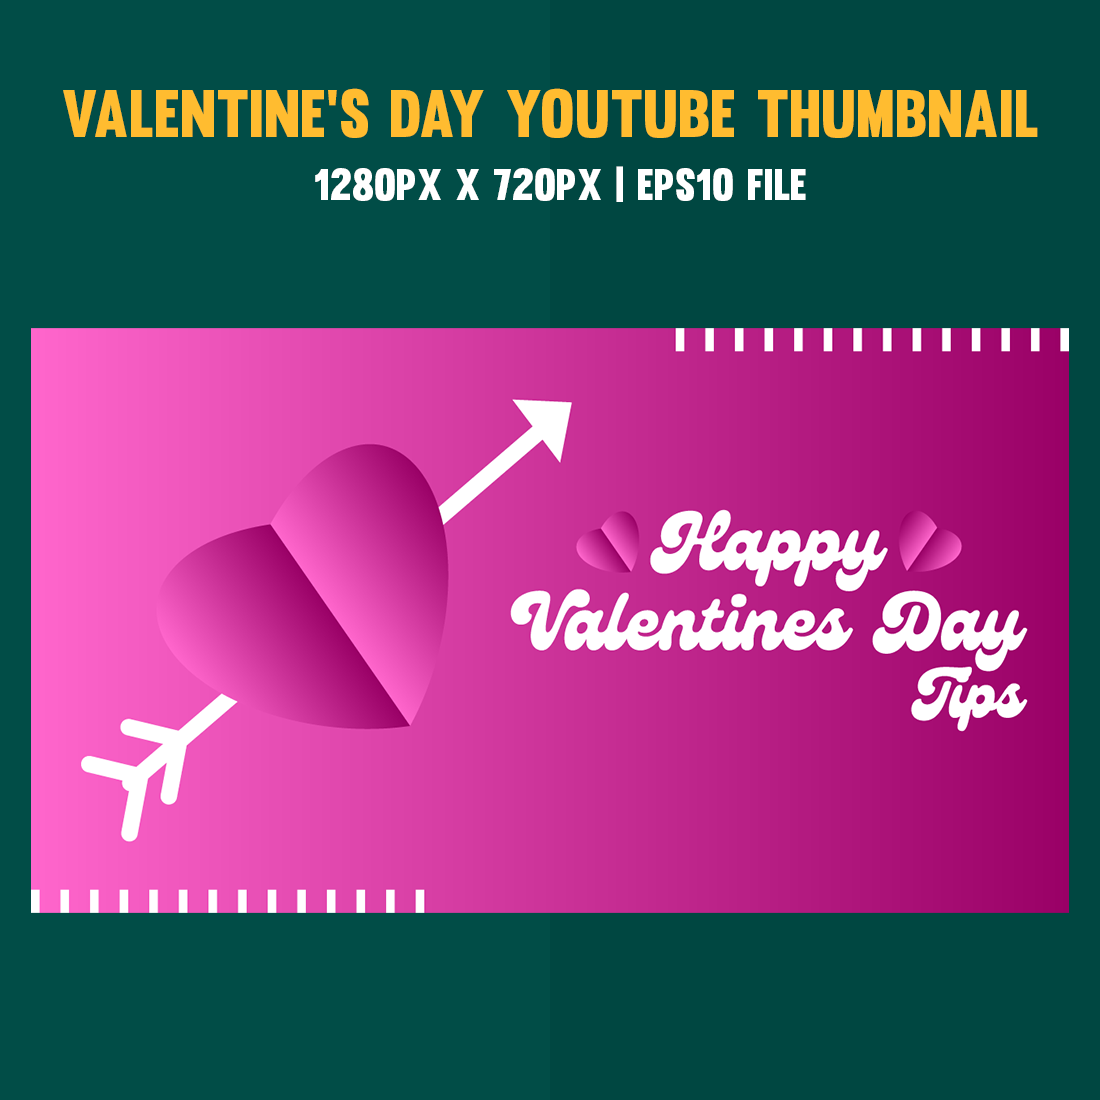 Happy Valentines Day Youtube Thumbnail cover image.